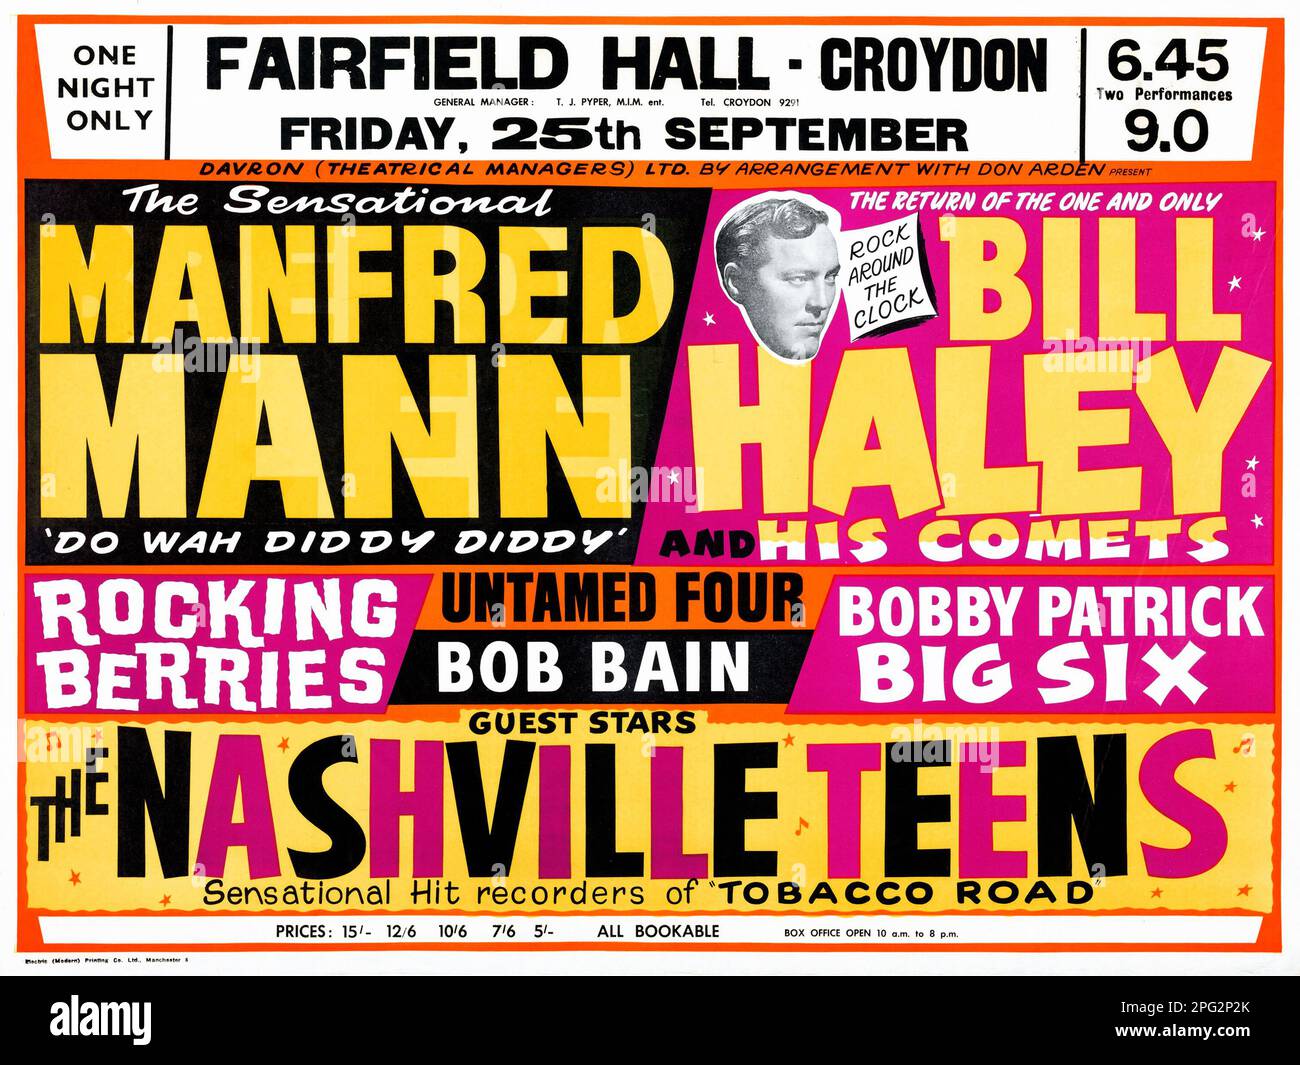 Vintage concert poster - Fairfield Hall Croydon - Manfred Mann, Bill Haley and his Comets, The Nashville Teens 1964 Stock Photo